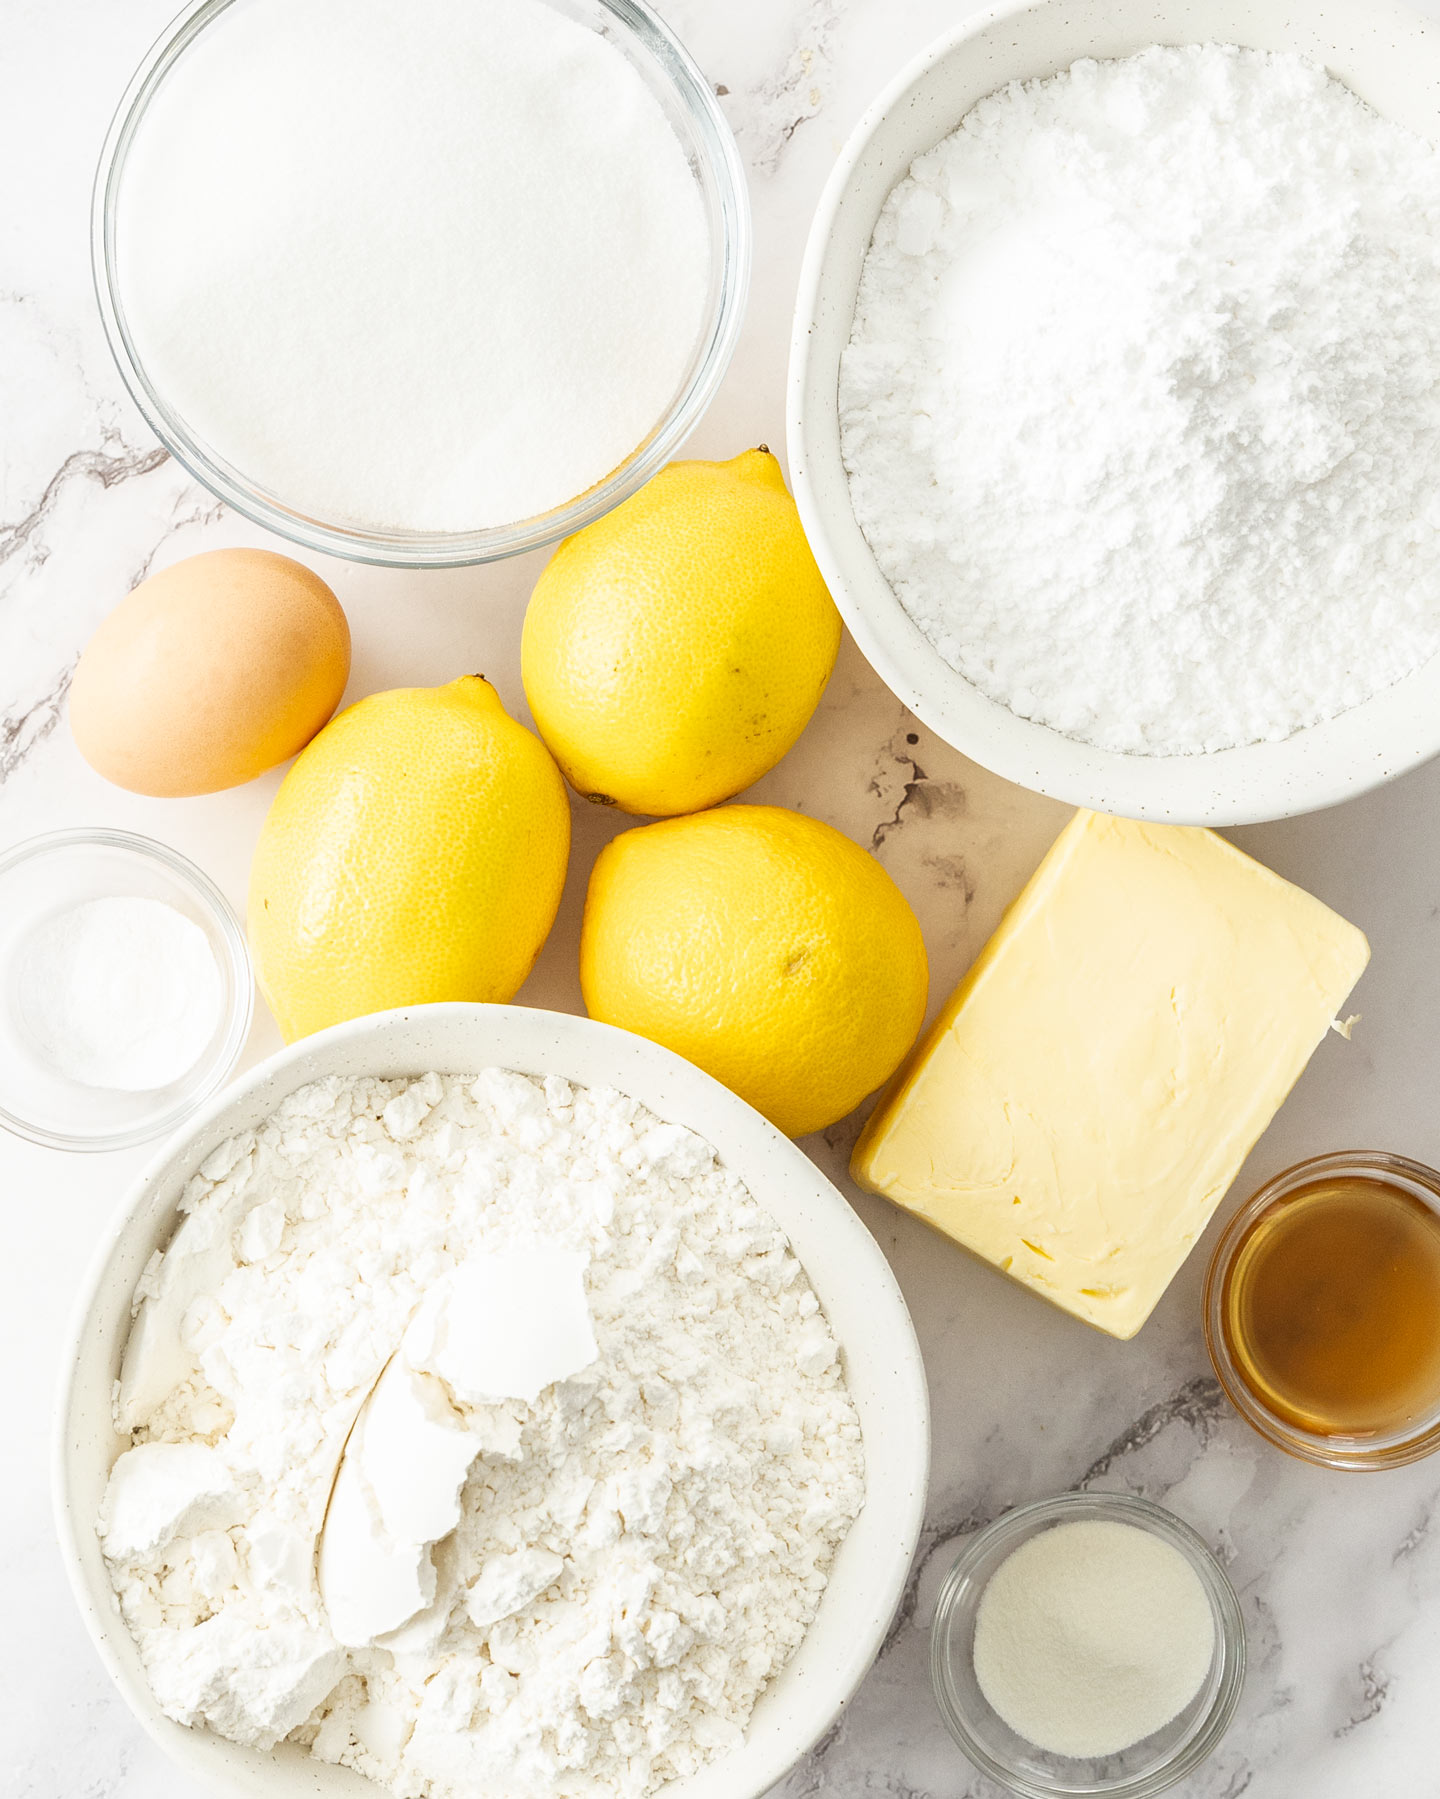 Ingredients for lemon biscuits on a marble surface.